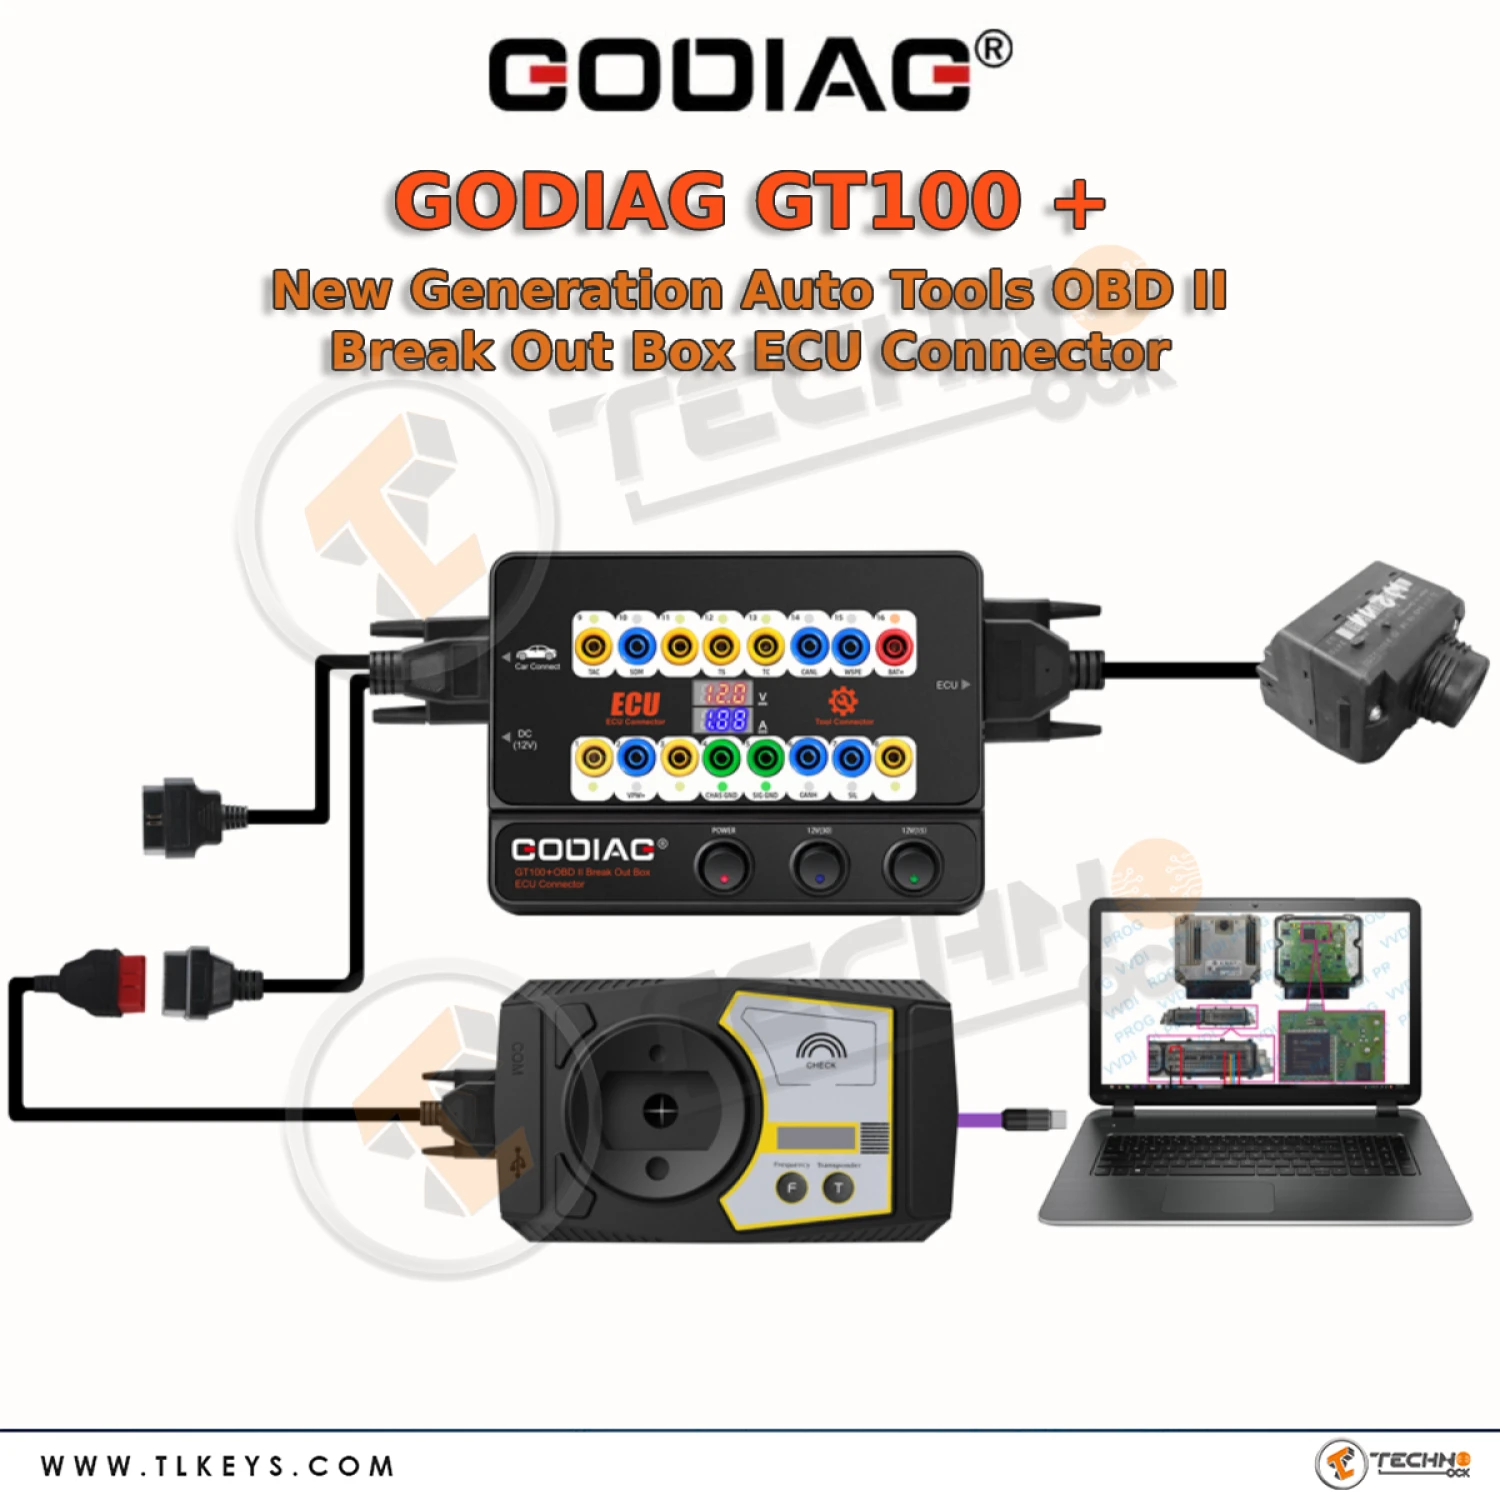 GODIAG-GT100-connectors-and-dedicated-modules-are-under-development